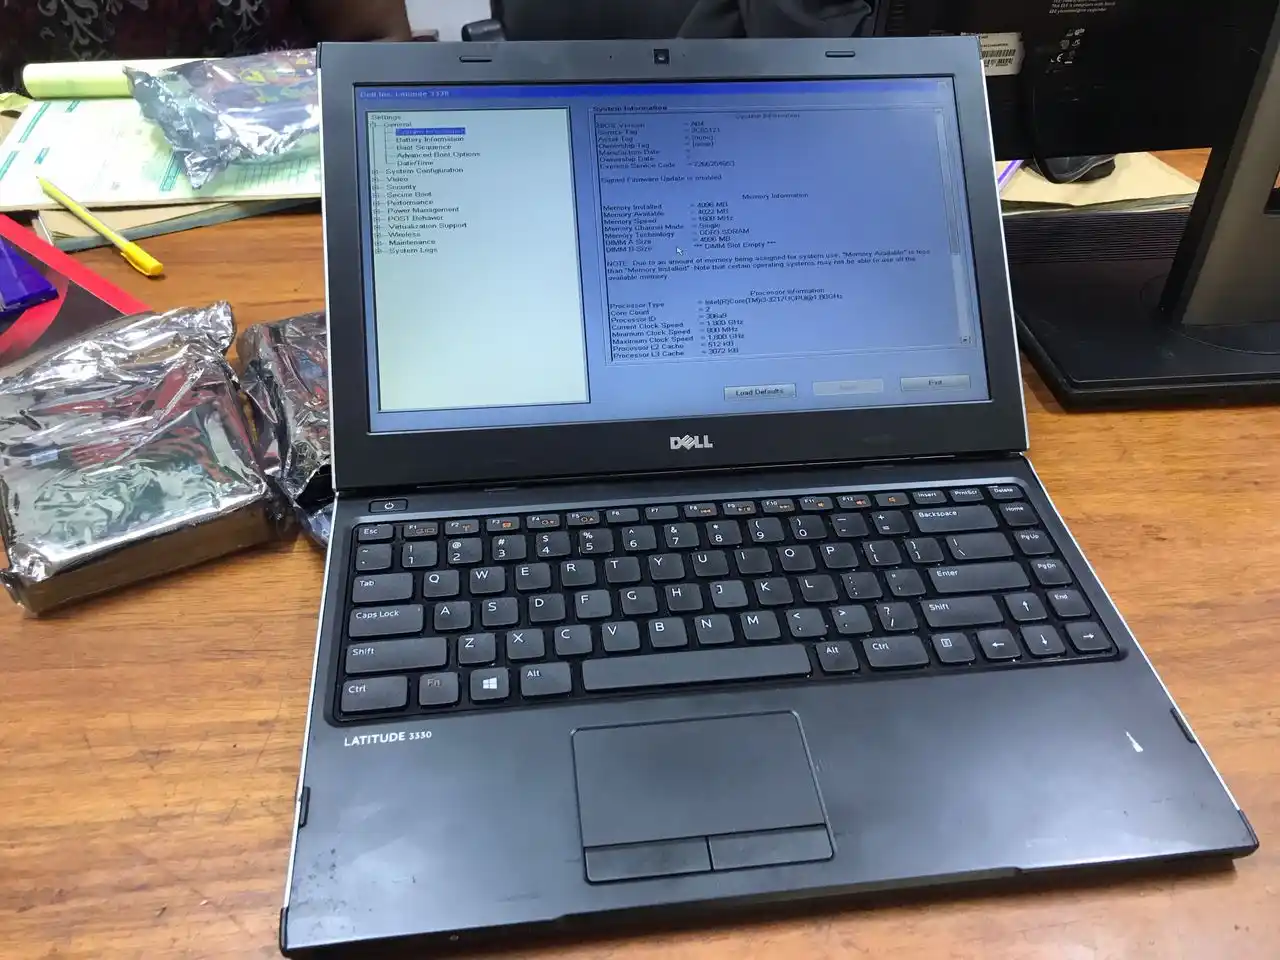 Dell Corei3 Laptop Ram 4Gb Disk 500Gb Inch 13 2.10Ghz 3Hrs